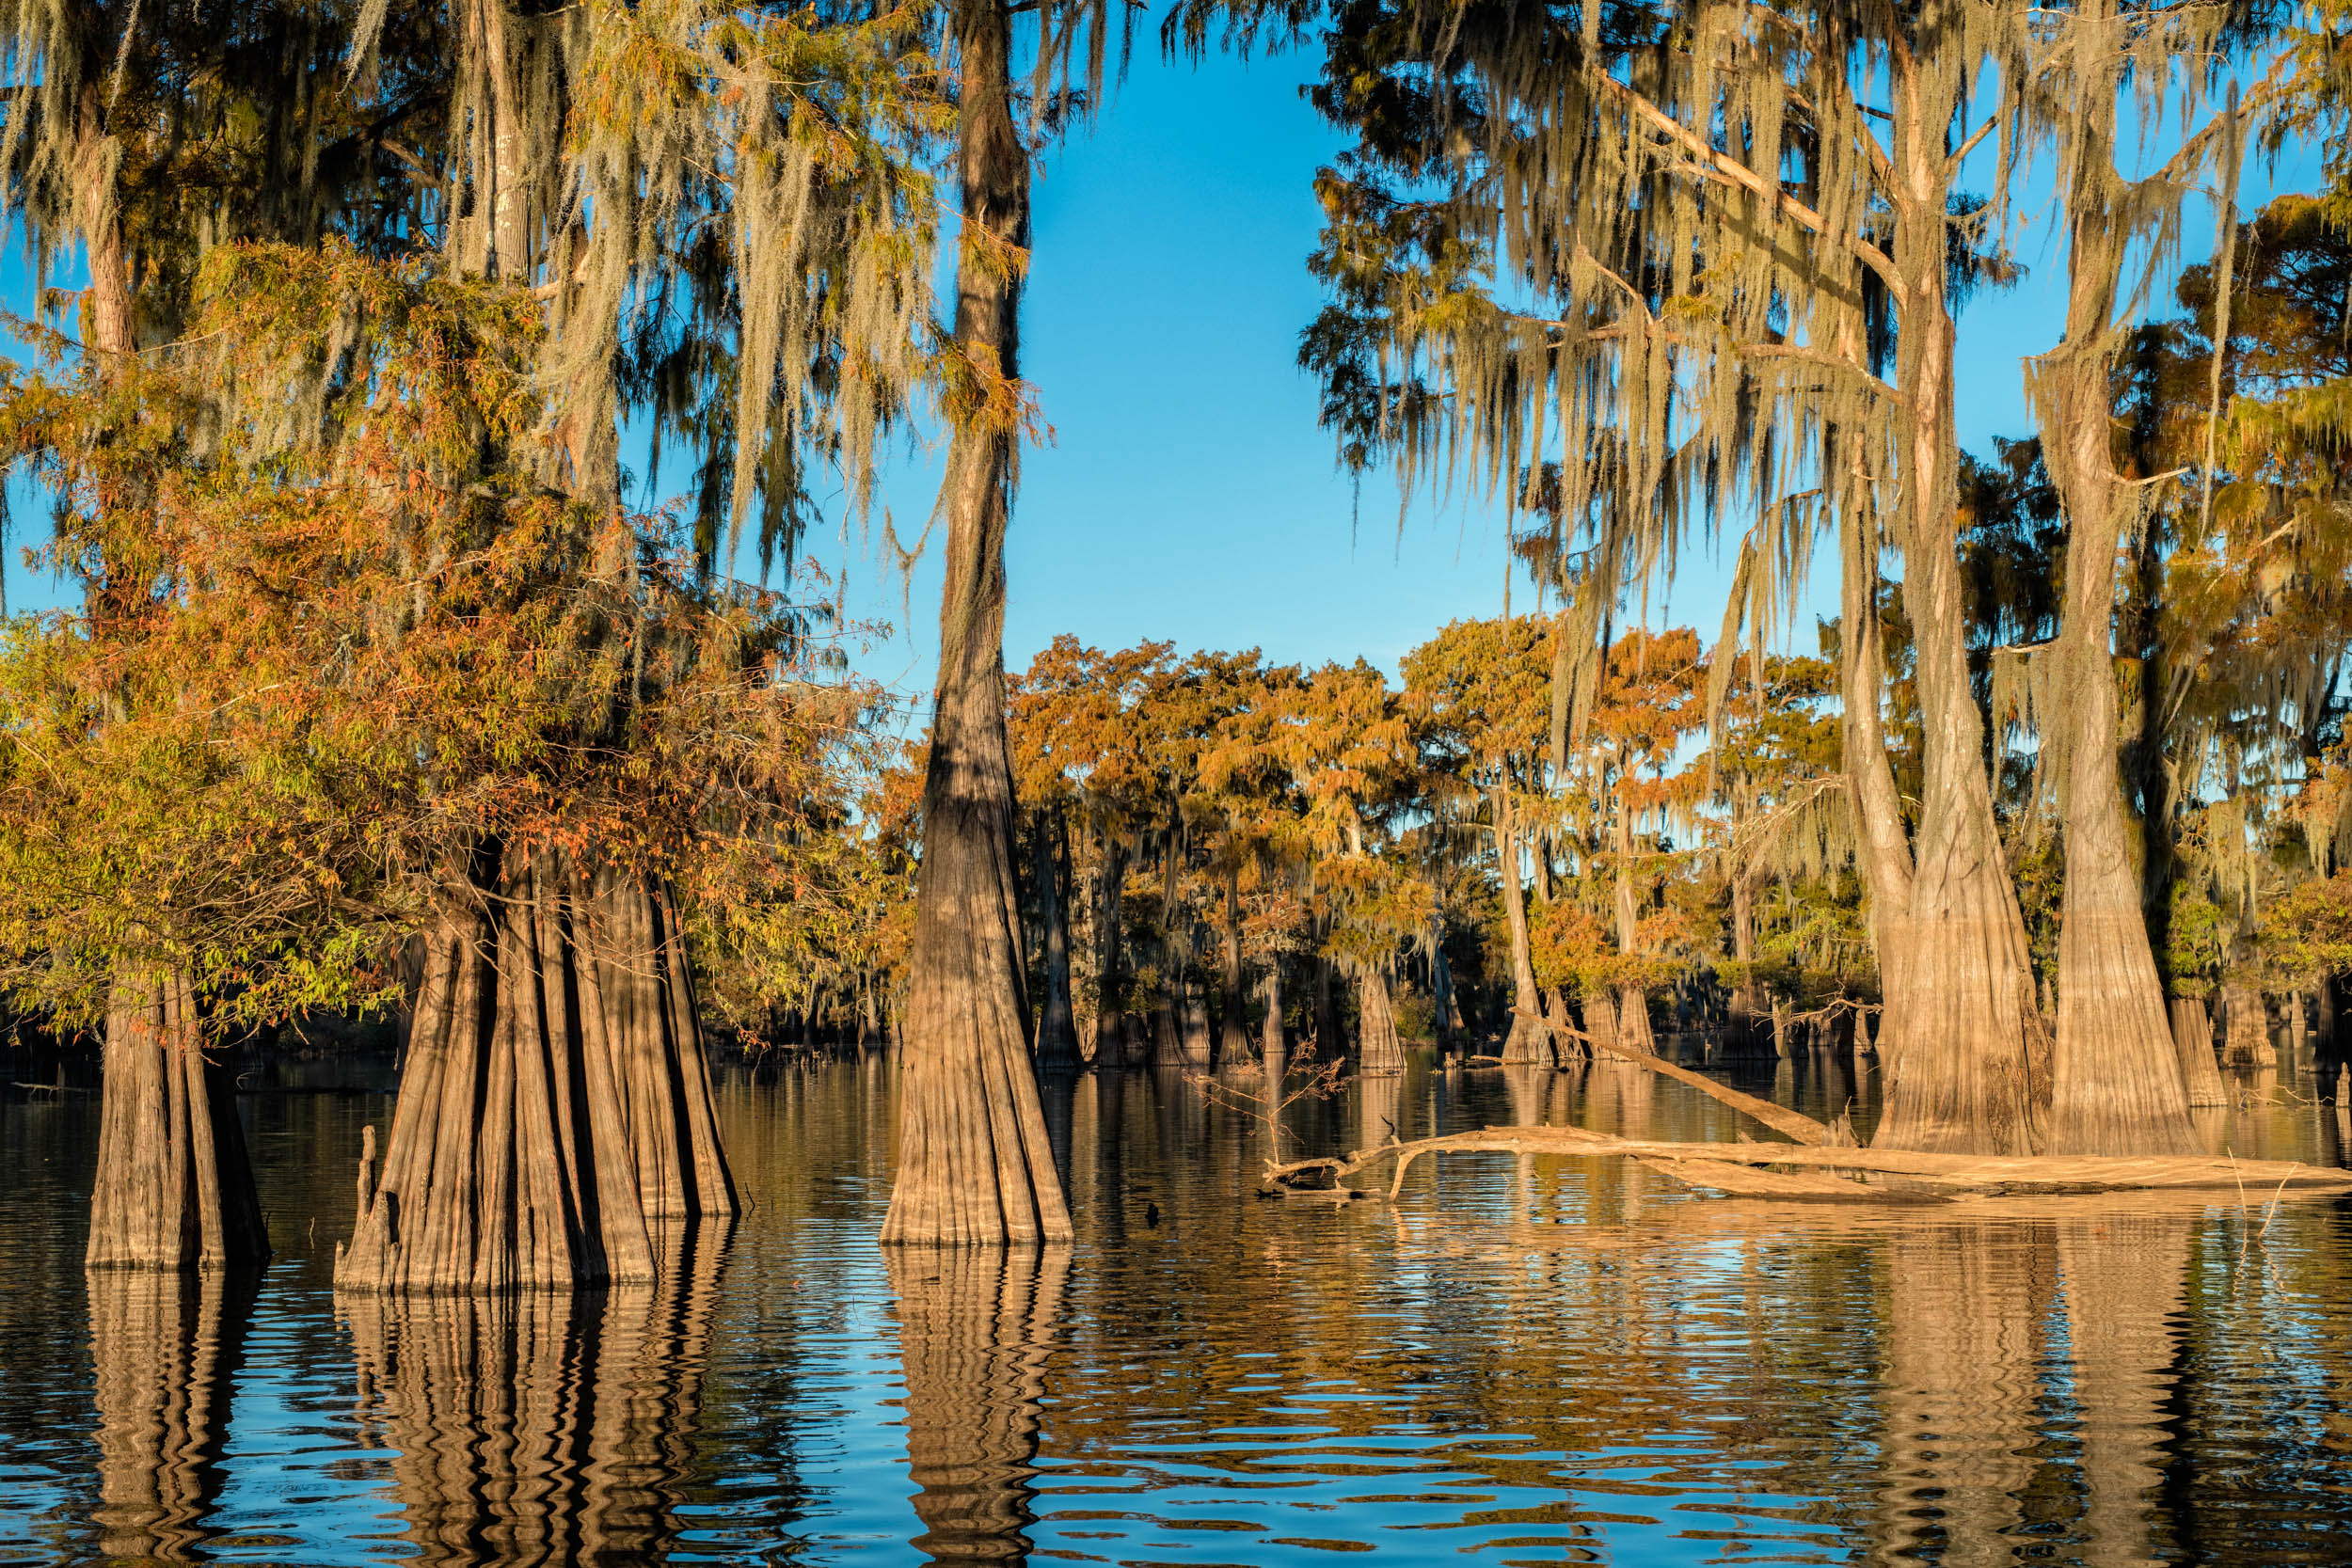  Cypress trees growing in the waters of Henderson Swamp with fall colors. B;ue Sky Sunny day - Vertical Panorama 